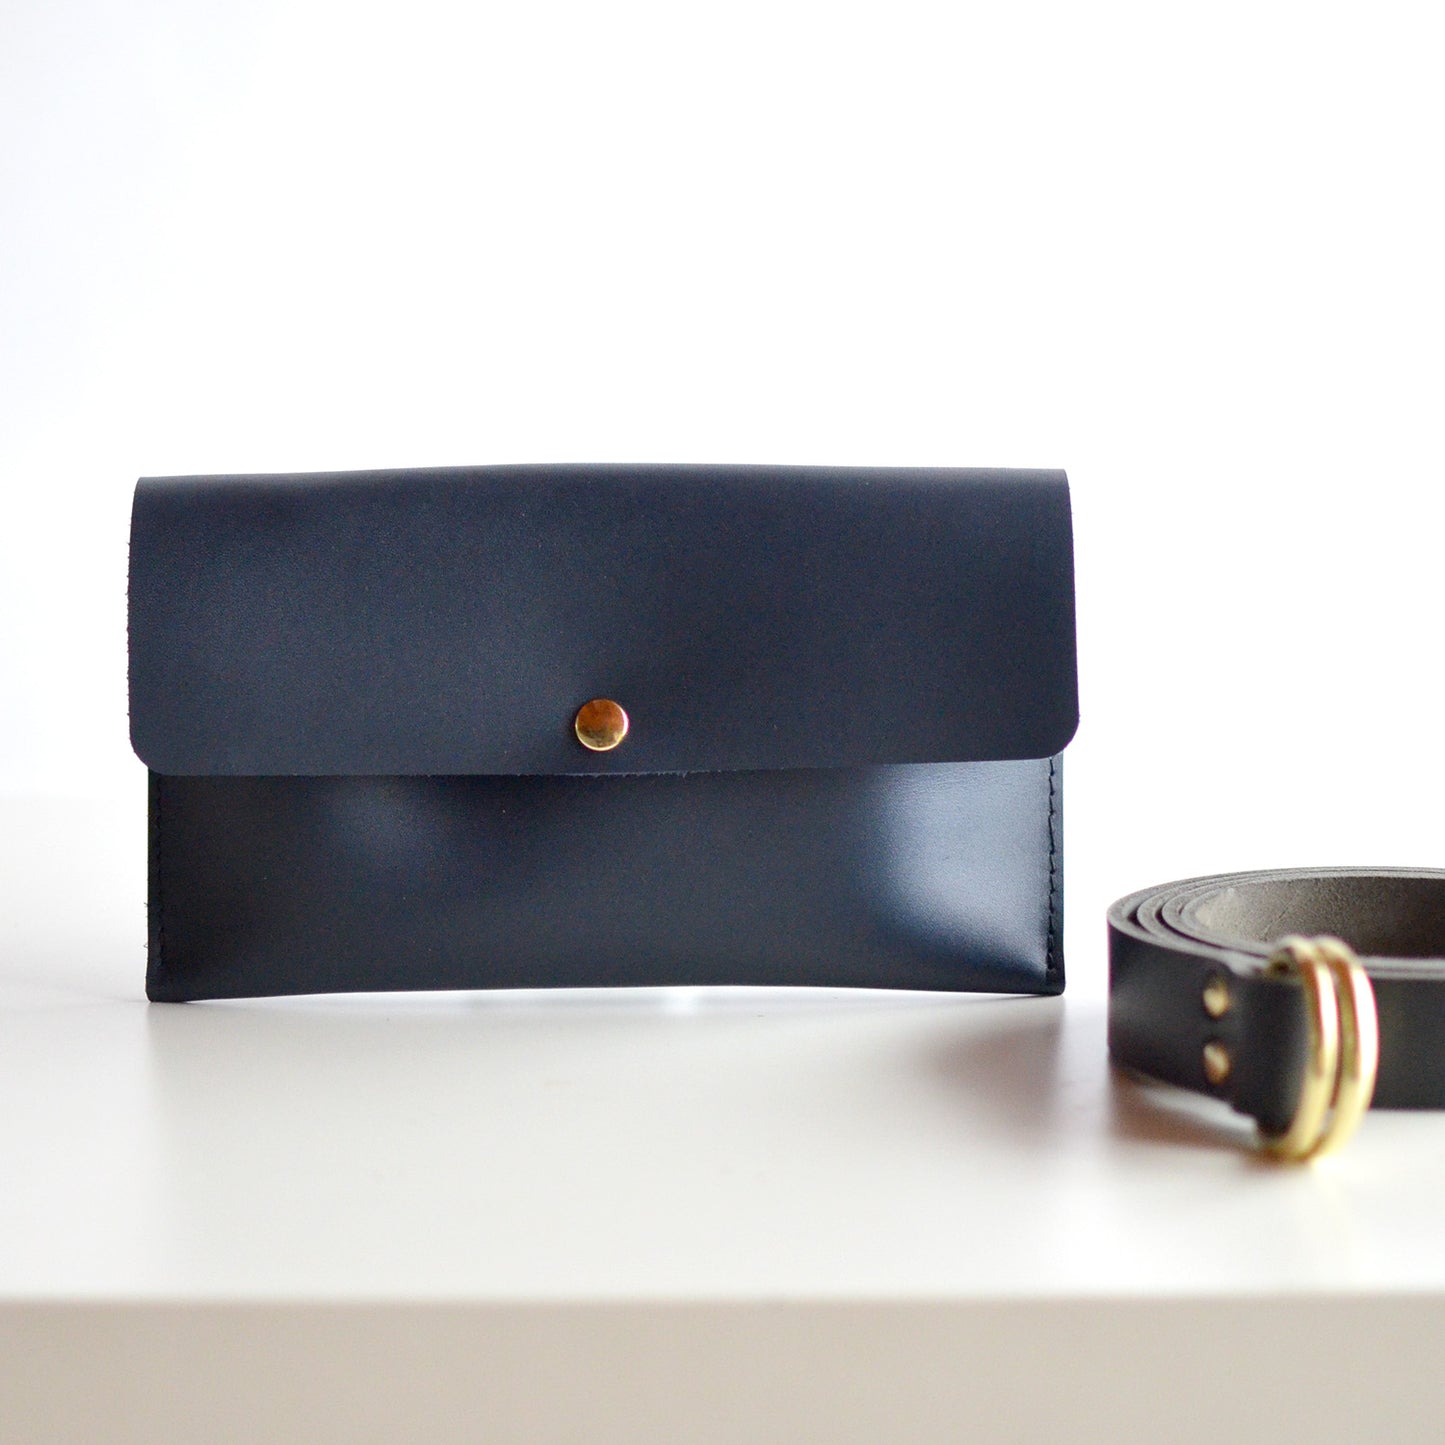 PERFECTLY IMPERFECT Hipster Bag (Fanny Pack + Clutch) - Navy Blue Leather